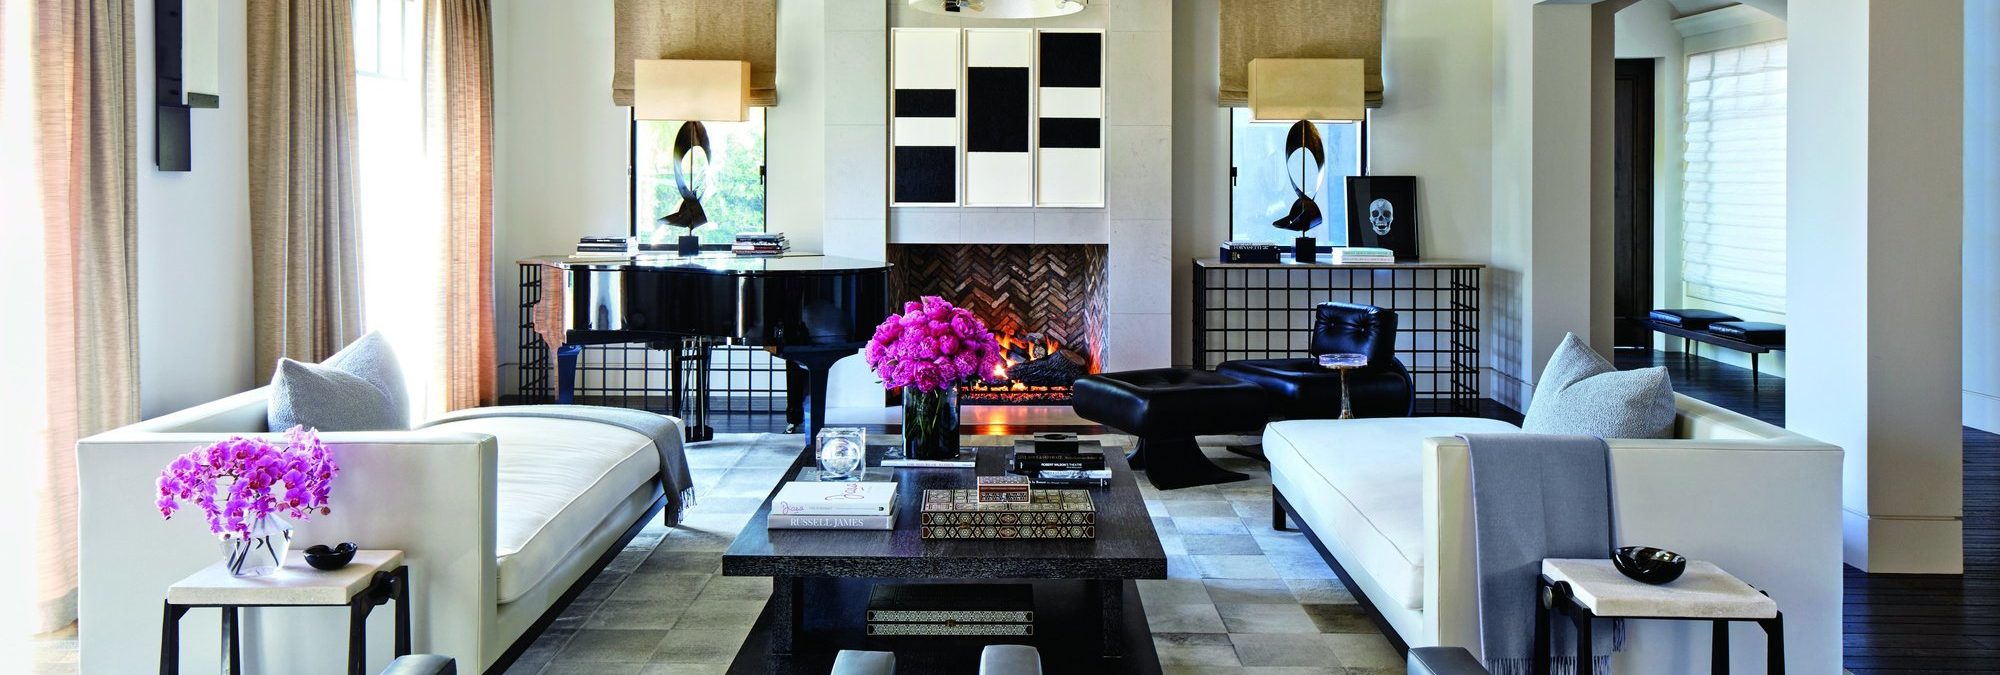 Patchwork cowhide rug in the home of Kourtney Kardashian